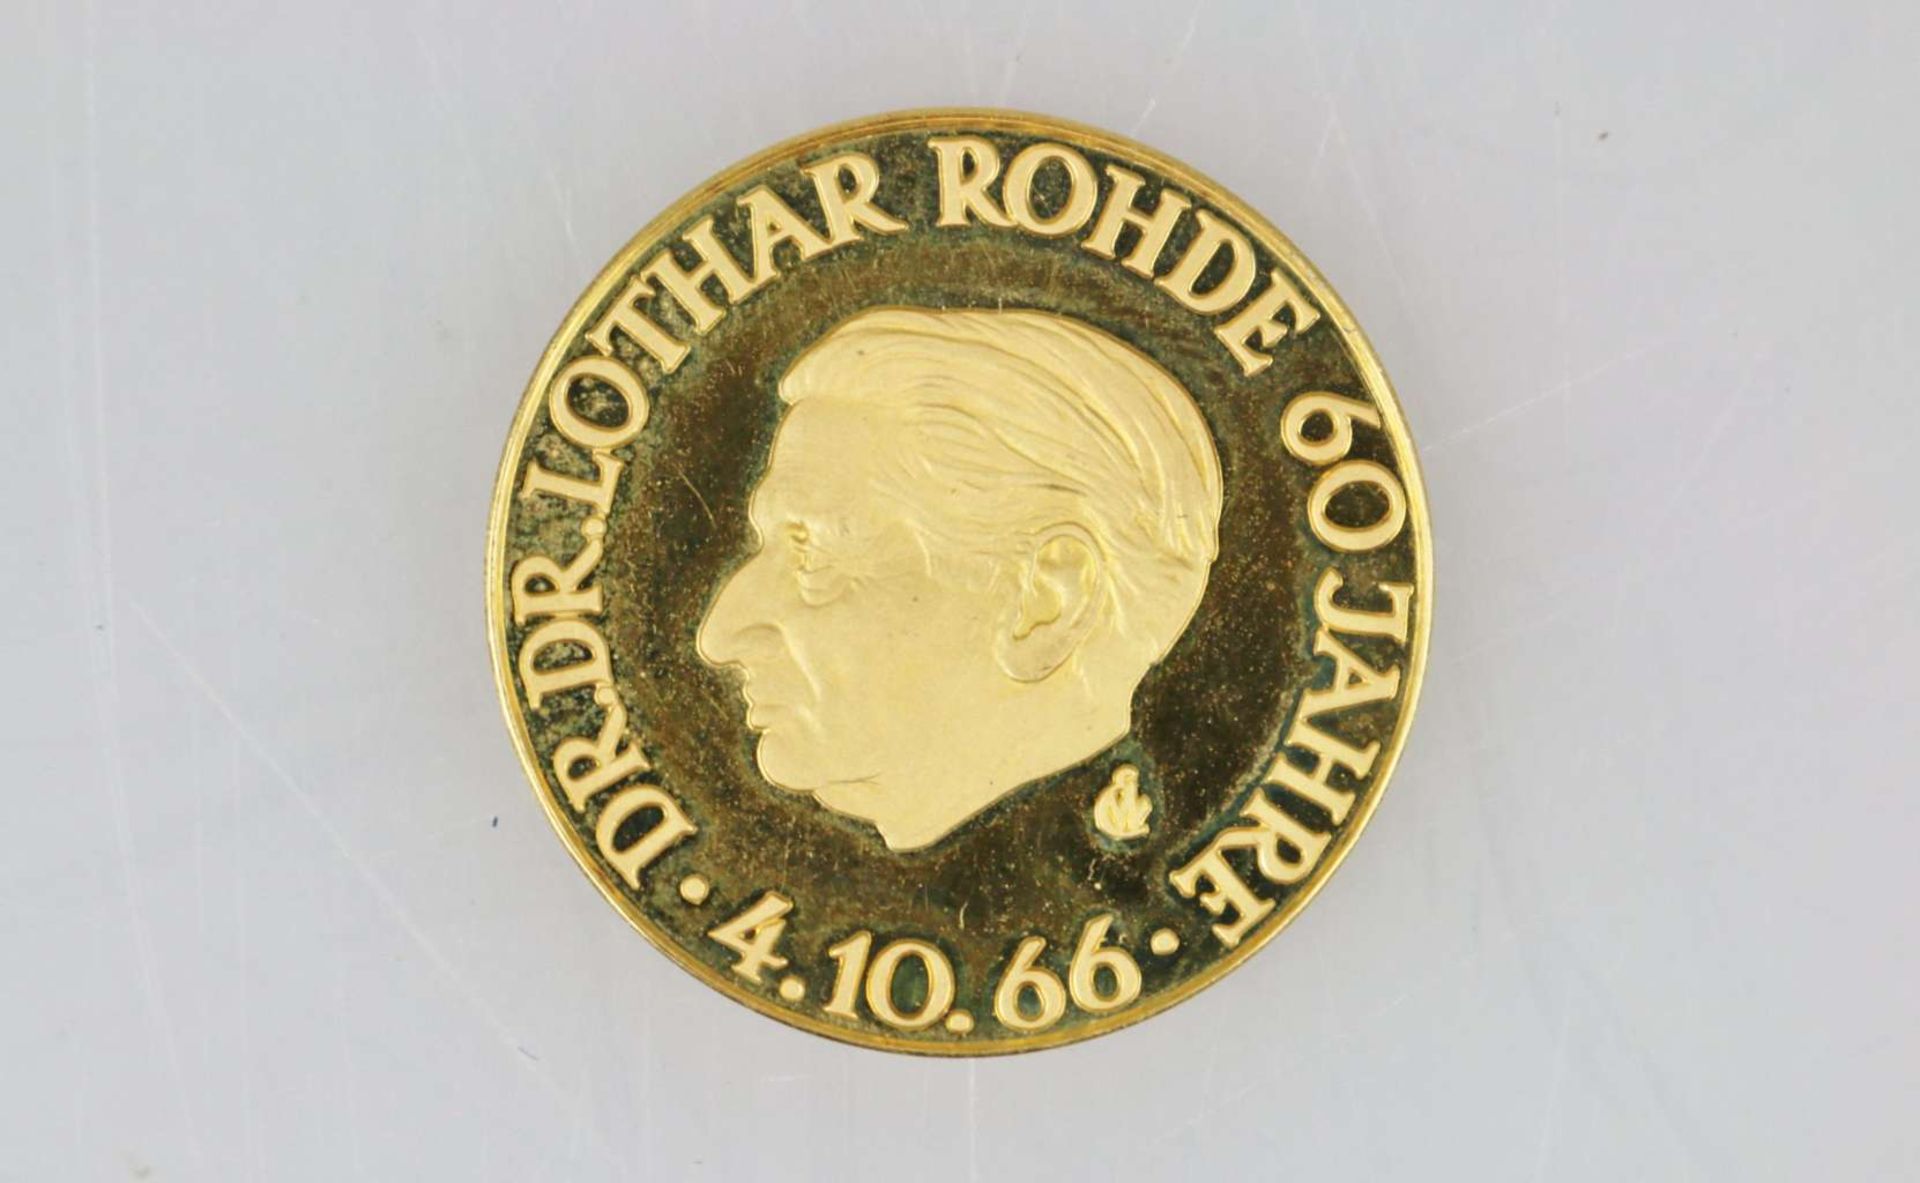 Goldmedaille Dr. Dr. Lothar Rohde